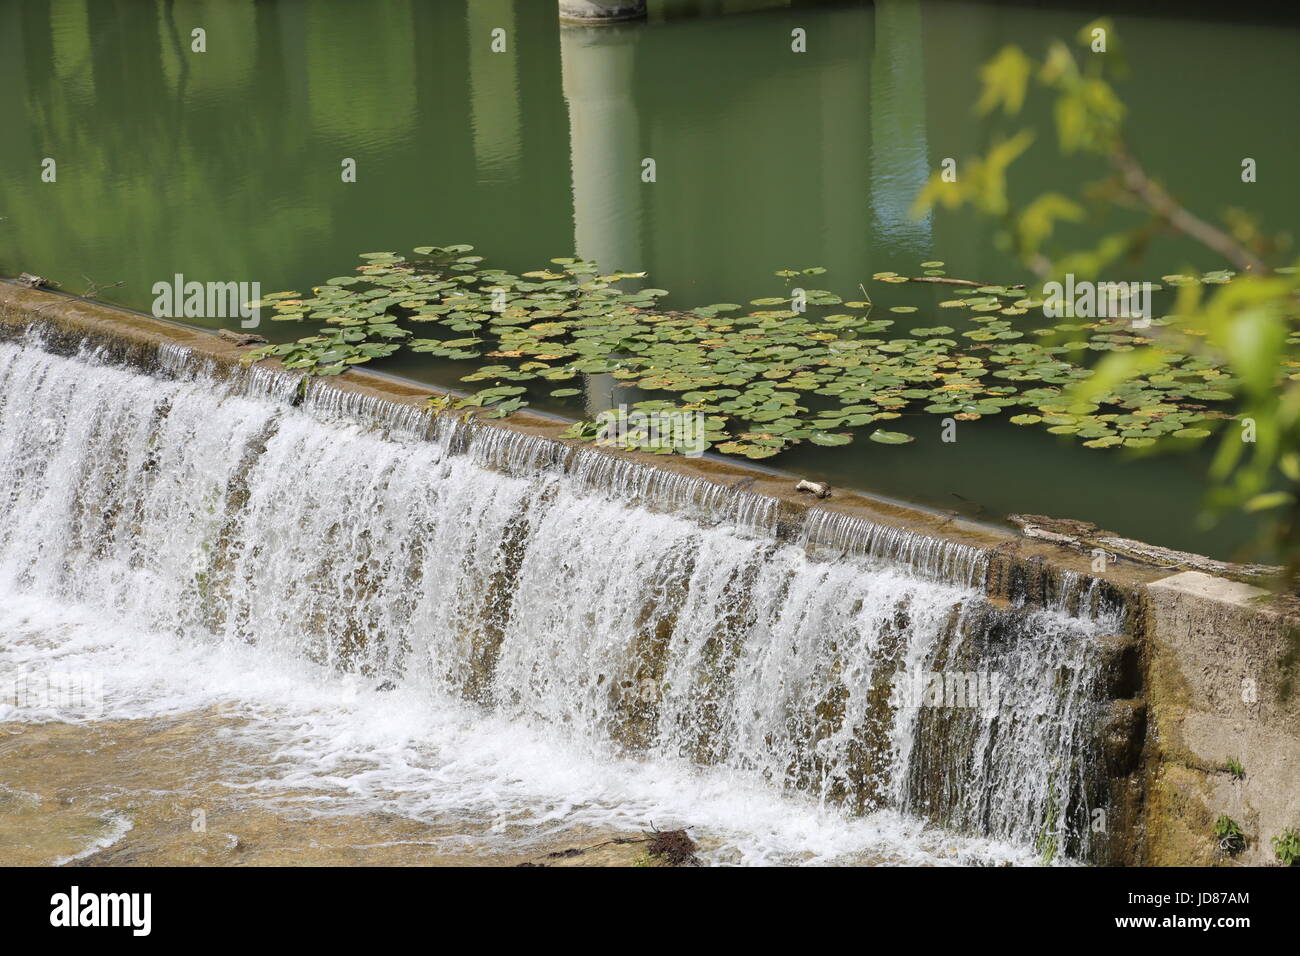 Texas Waterfall with Lily Pads Stock Photo